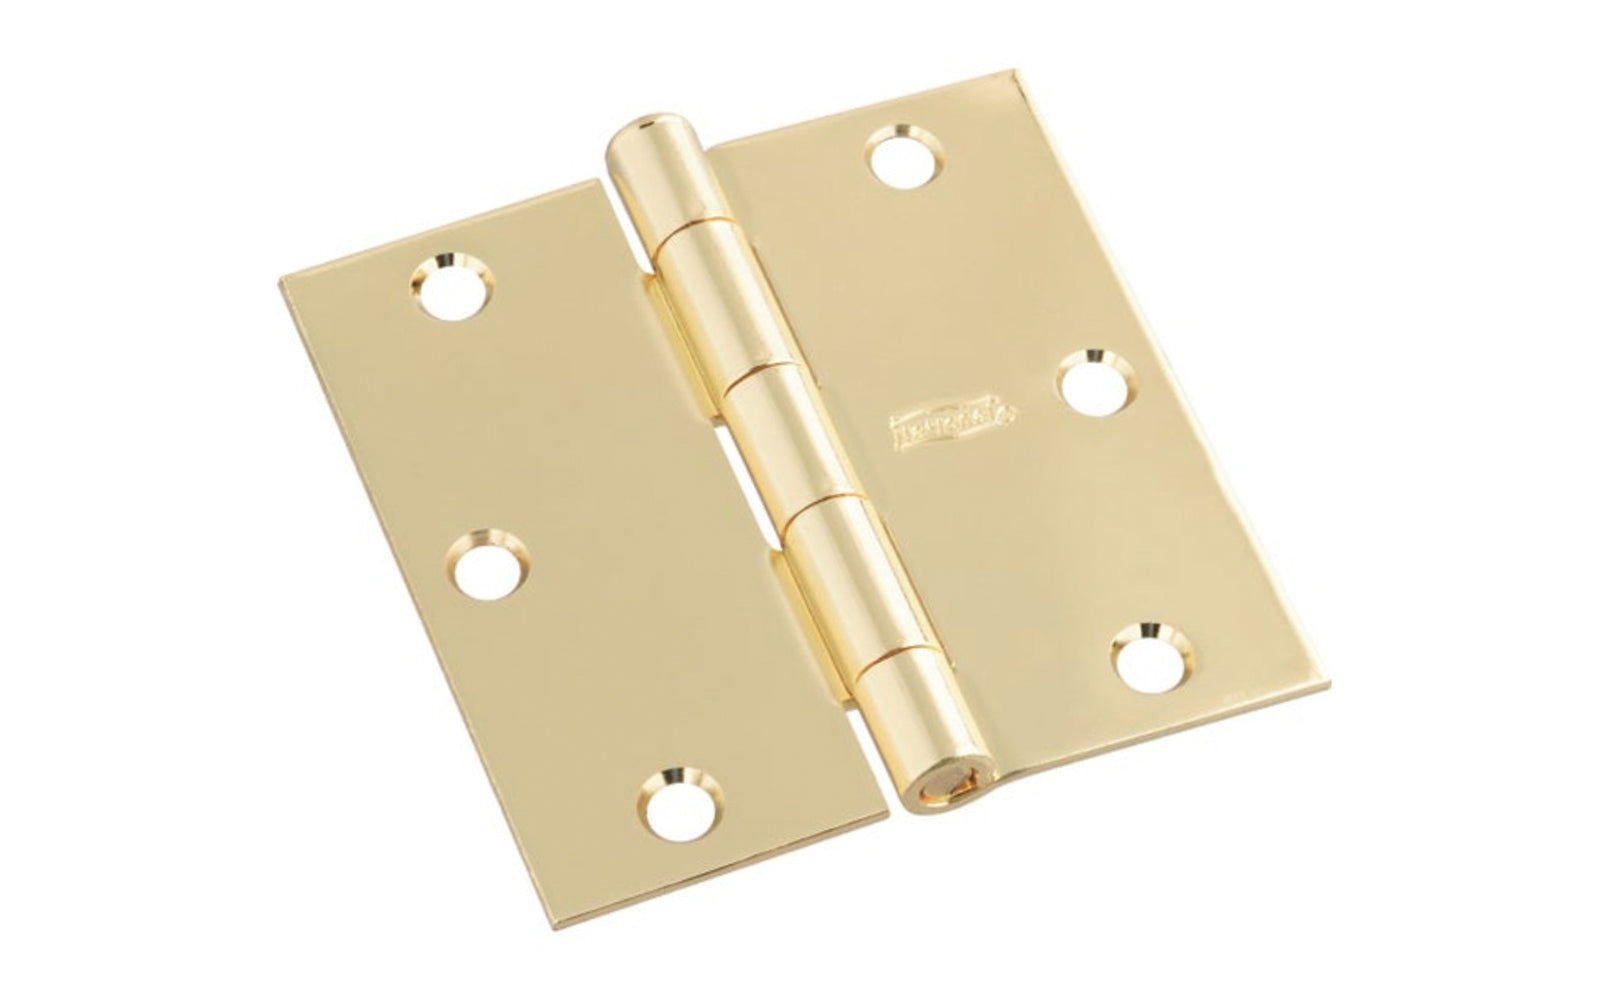 3-1/2" Bright Brass Door Hinge with square corners & a removable pin. Bright Brass finish on steel material. Countersunk holes. Includes flat head screws. 3-1/2" x 3-1/2" door hinge size. Five knuckle, full mortise design. National Hardware Model No. N830-212. 886780009521